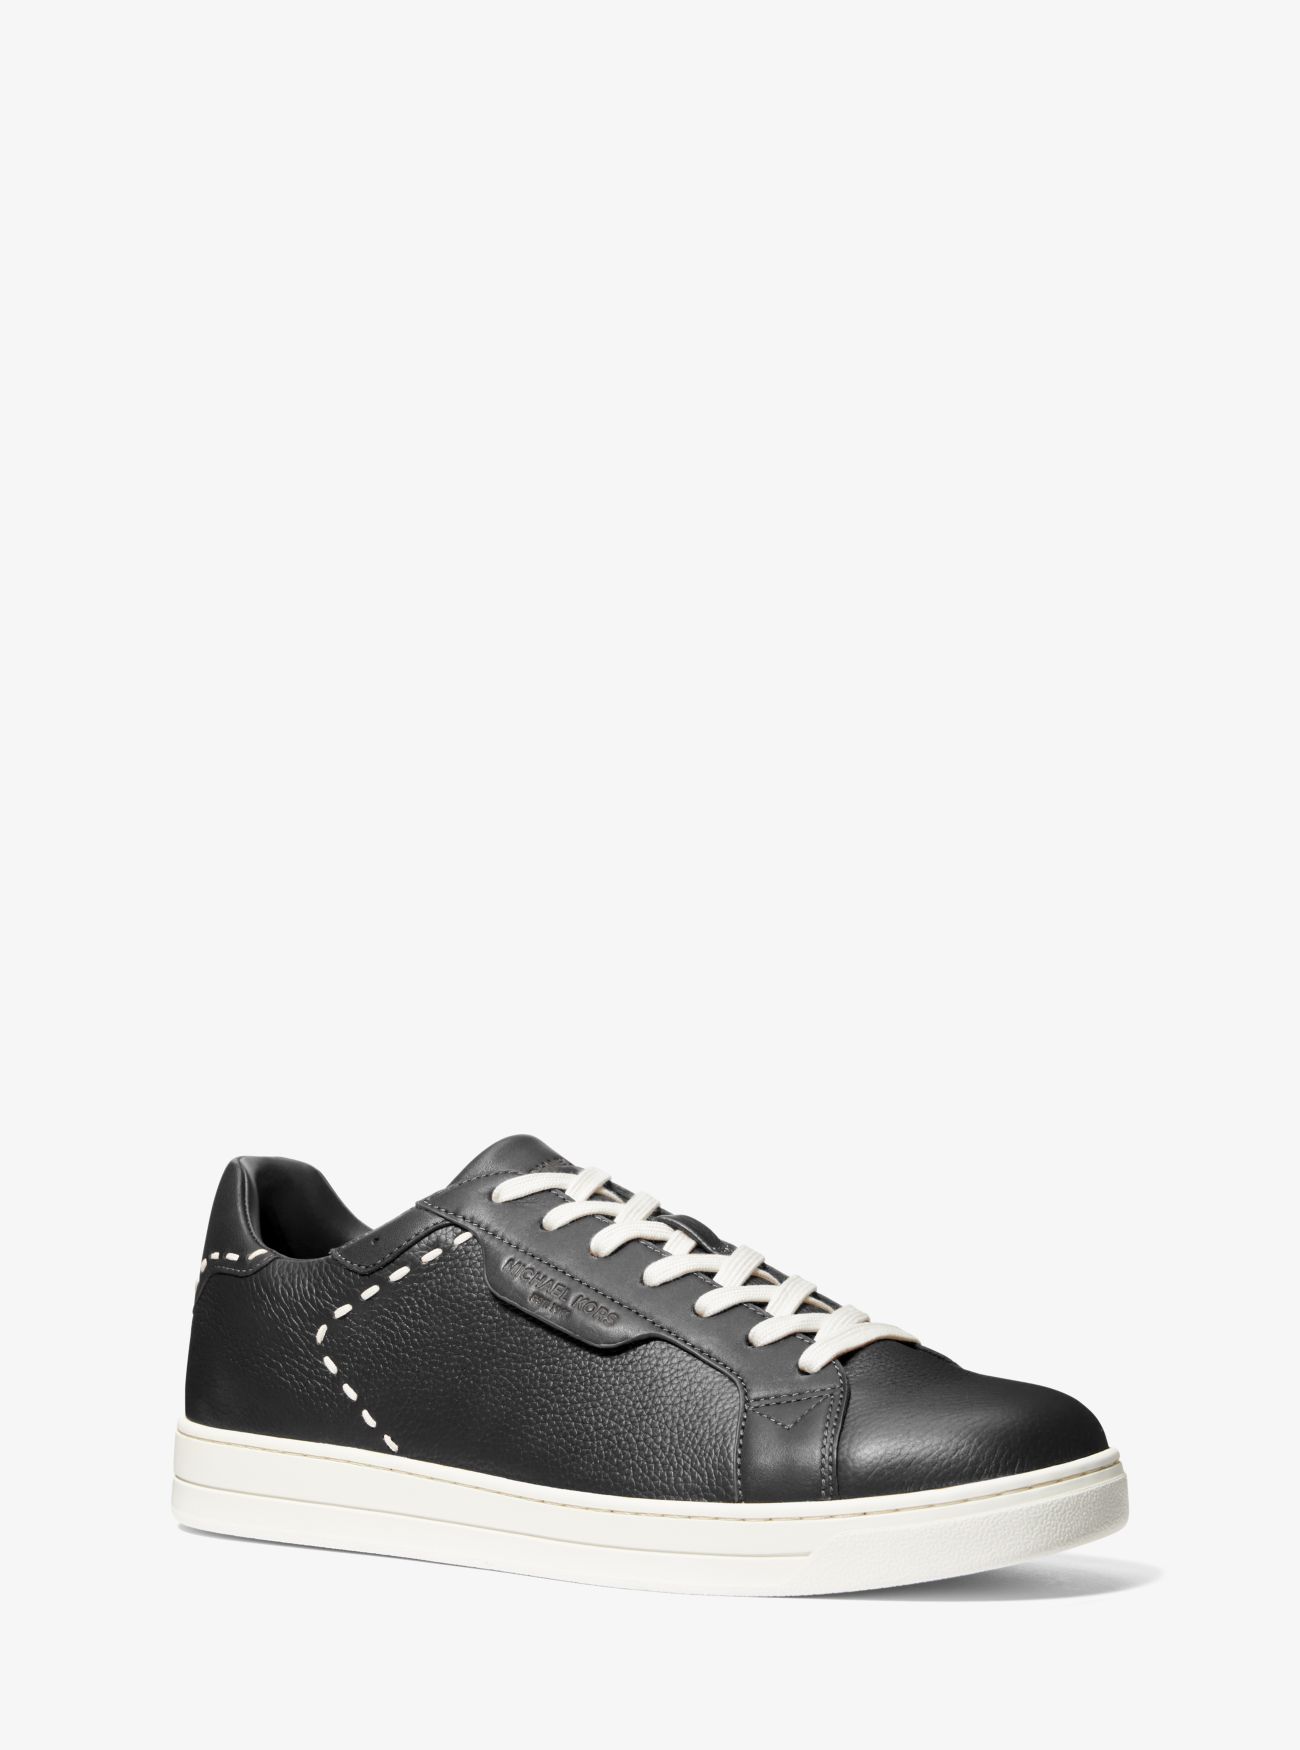 MK Keating Hand-Stitched Leather Trainers - Black - Michael Kors